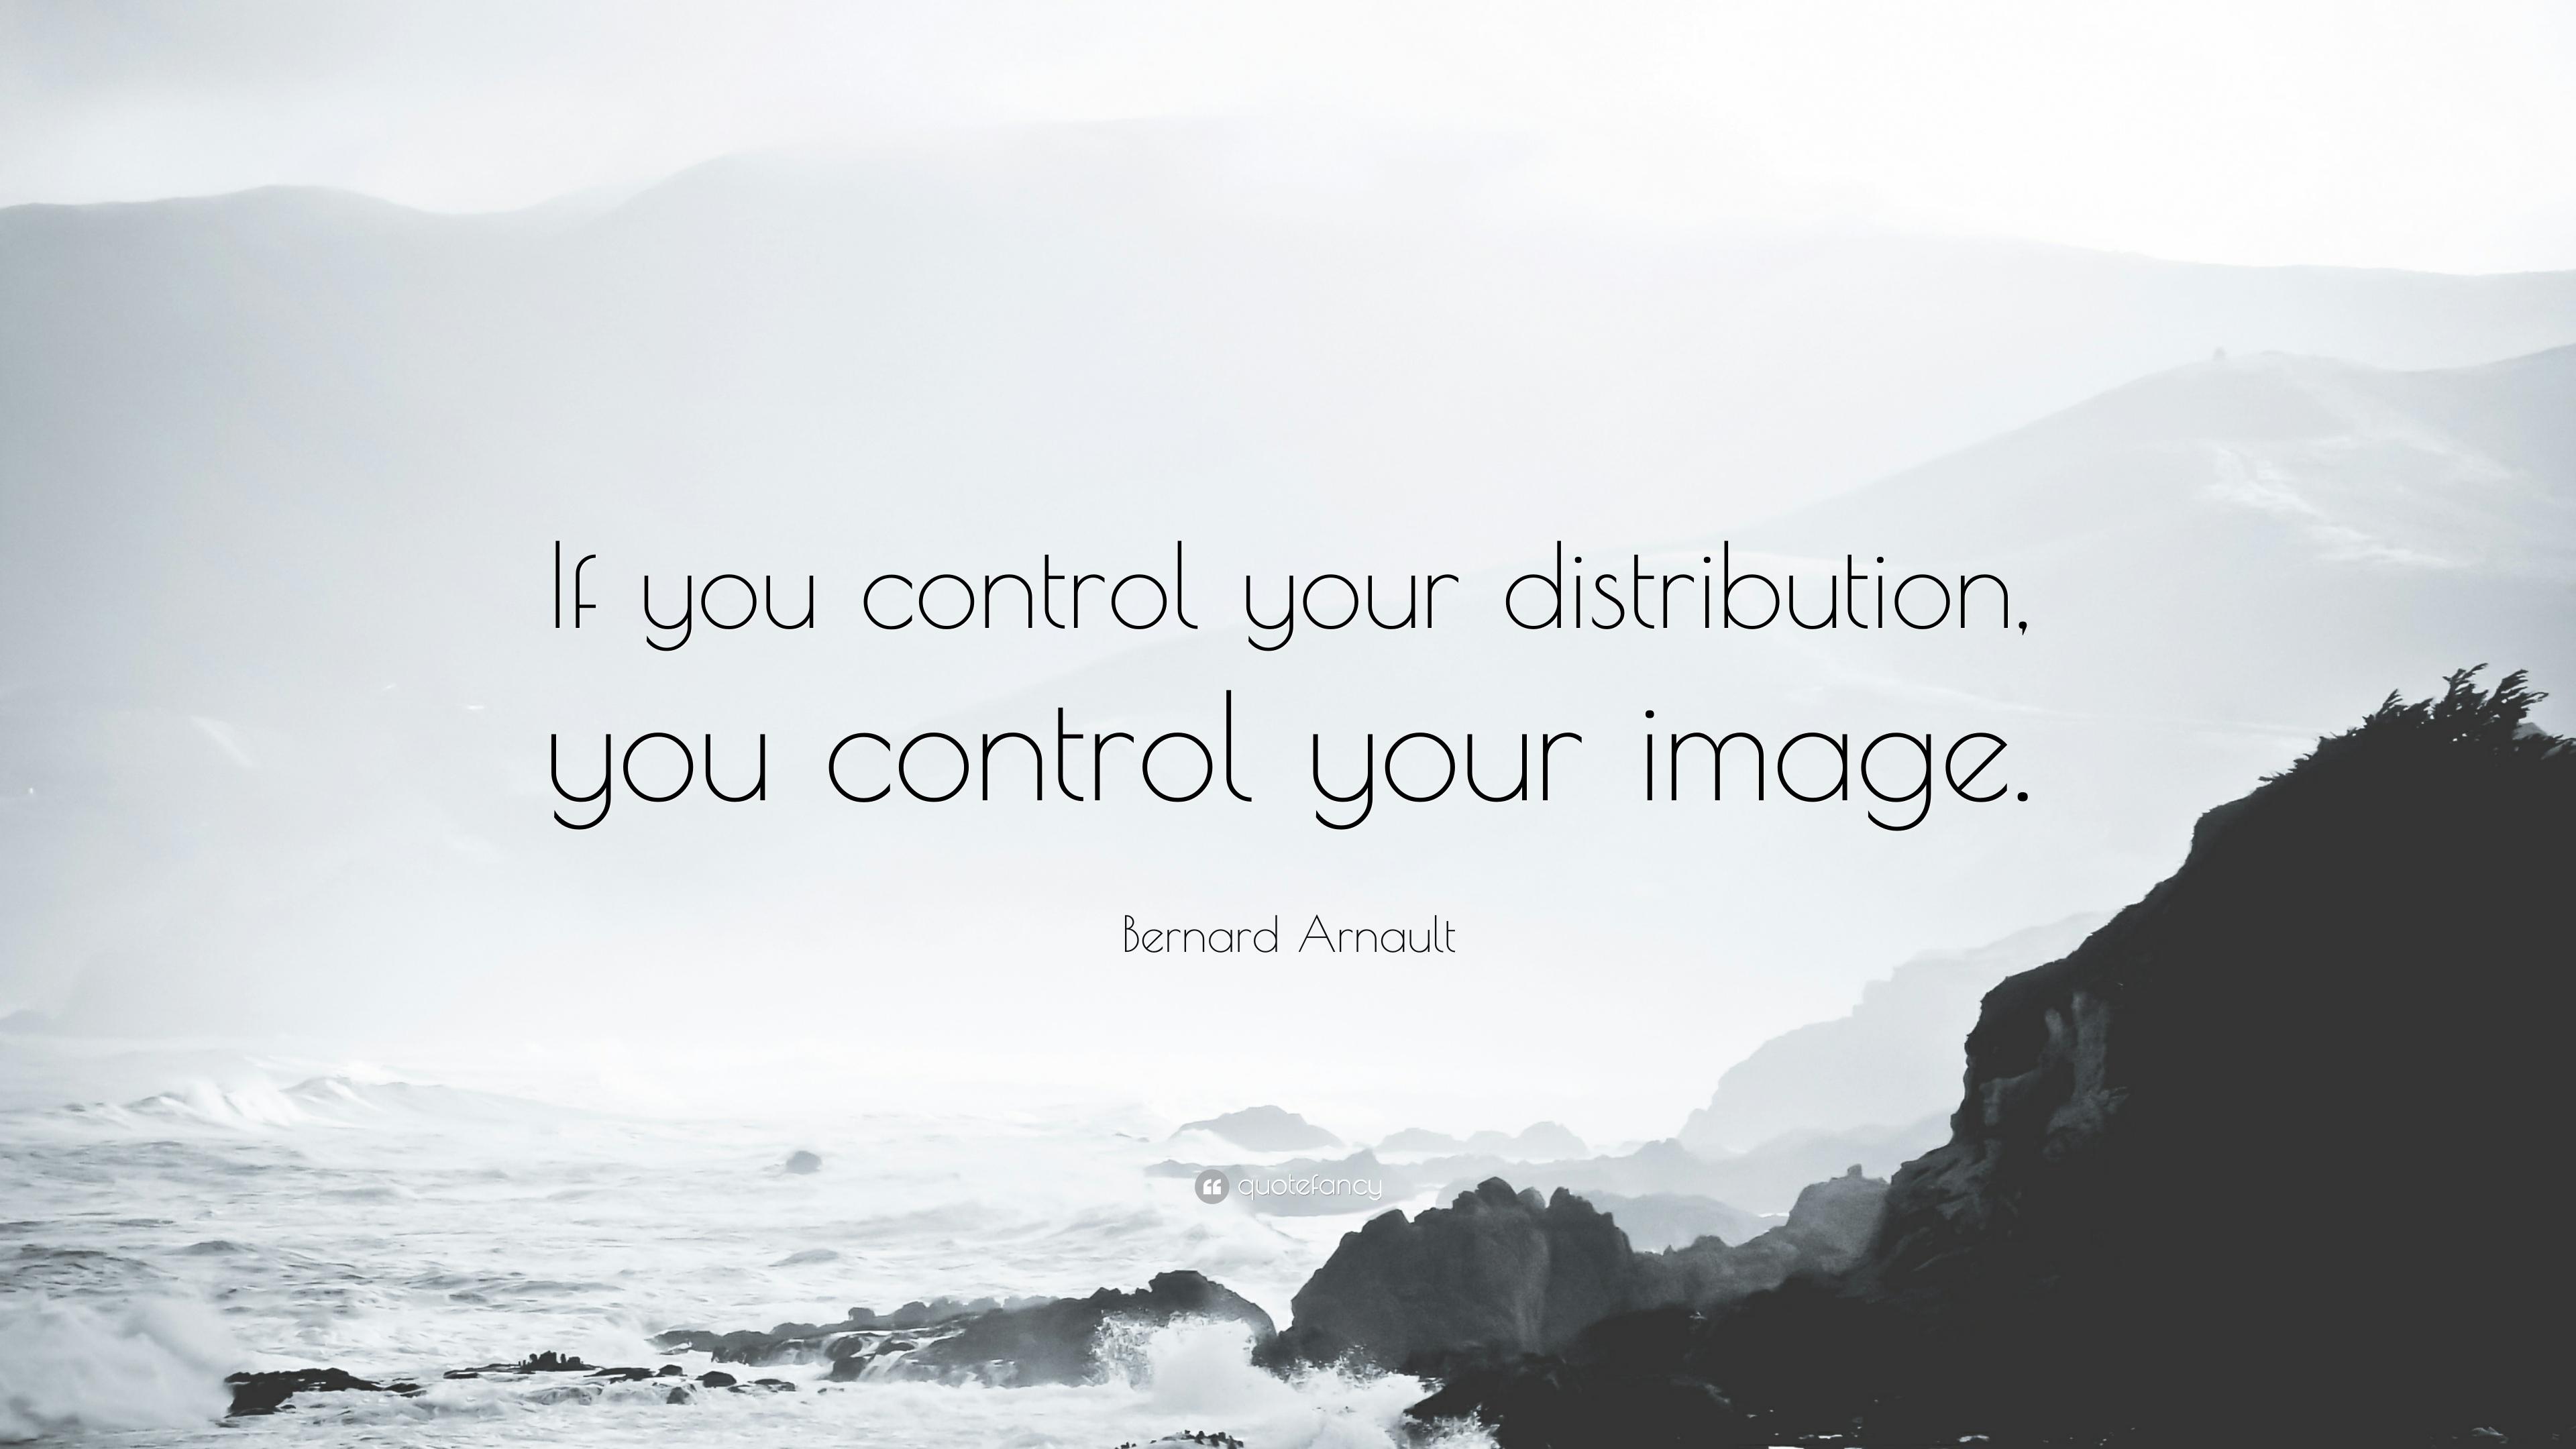 Bernard Arnault Quote: “If you control your distribution, you